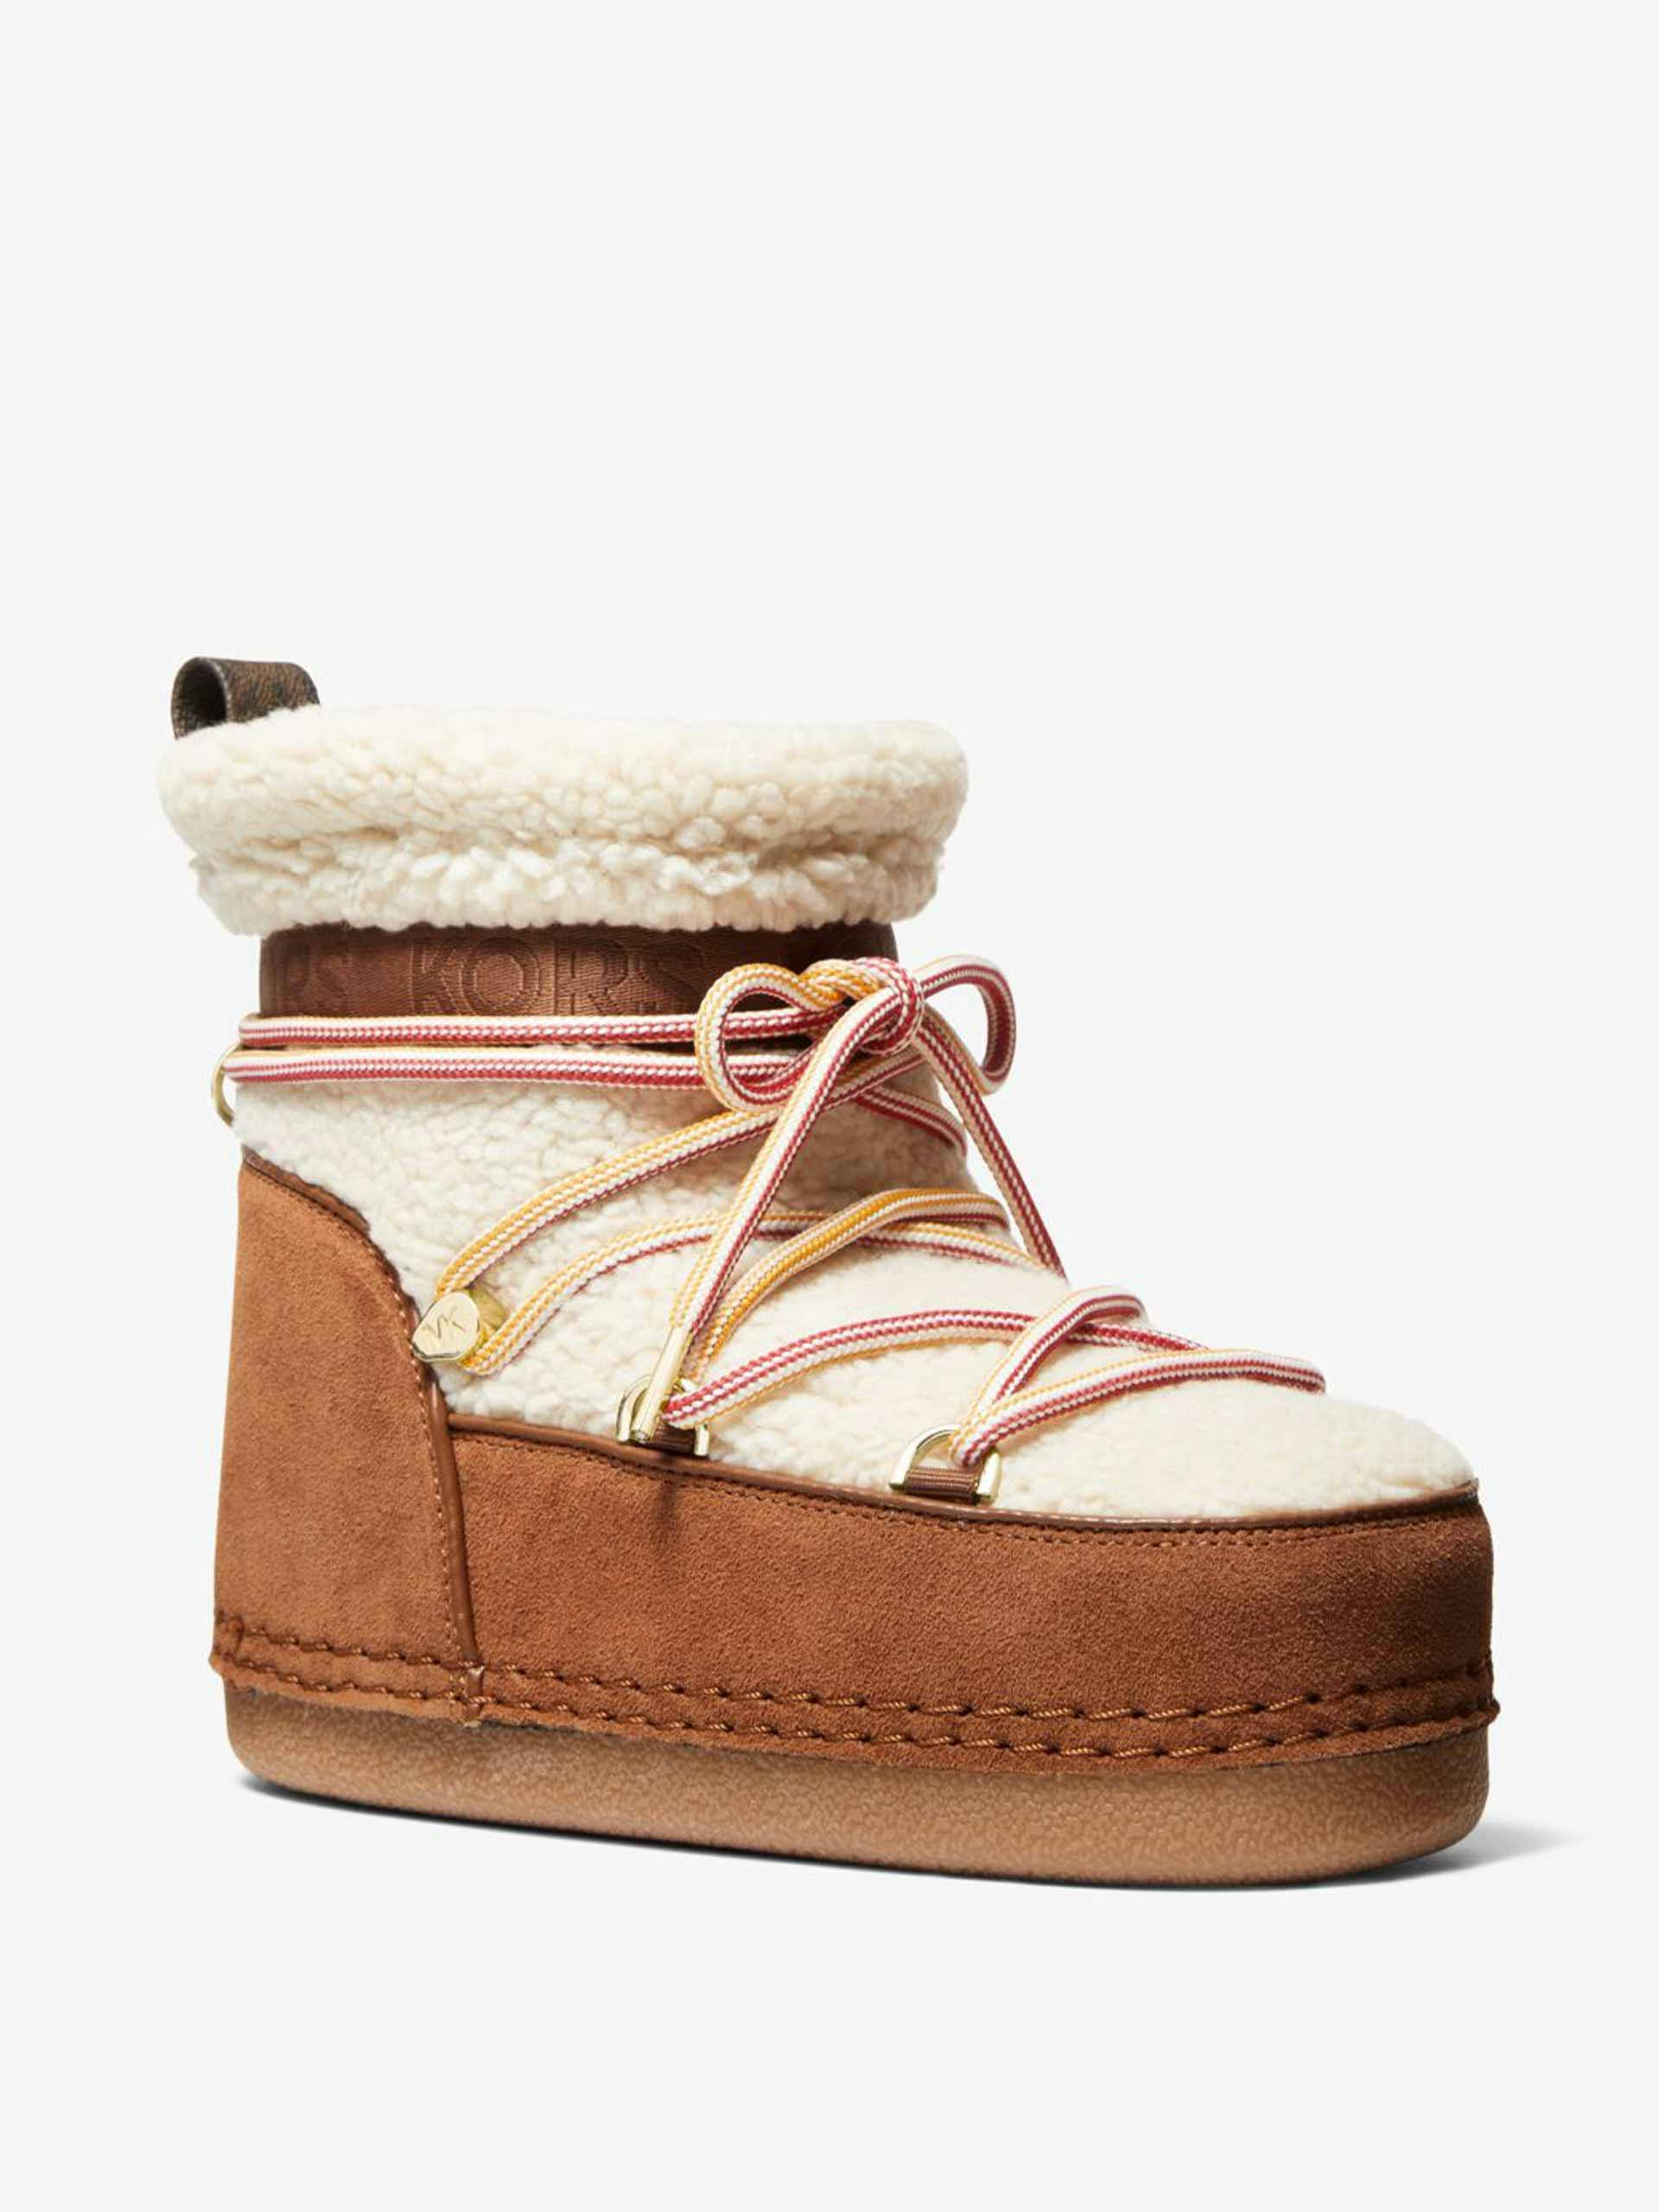 Zelda sherpa and faux suede boots